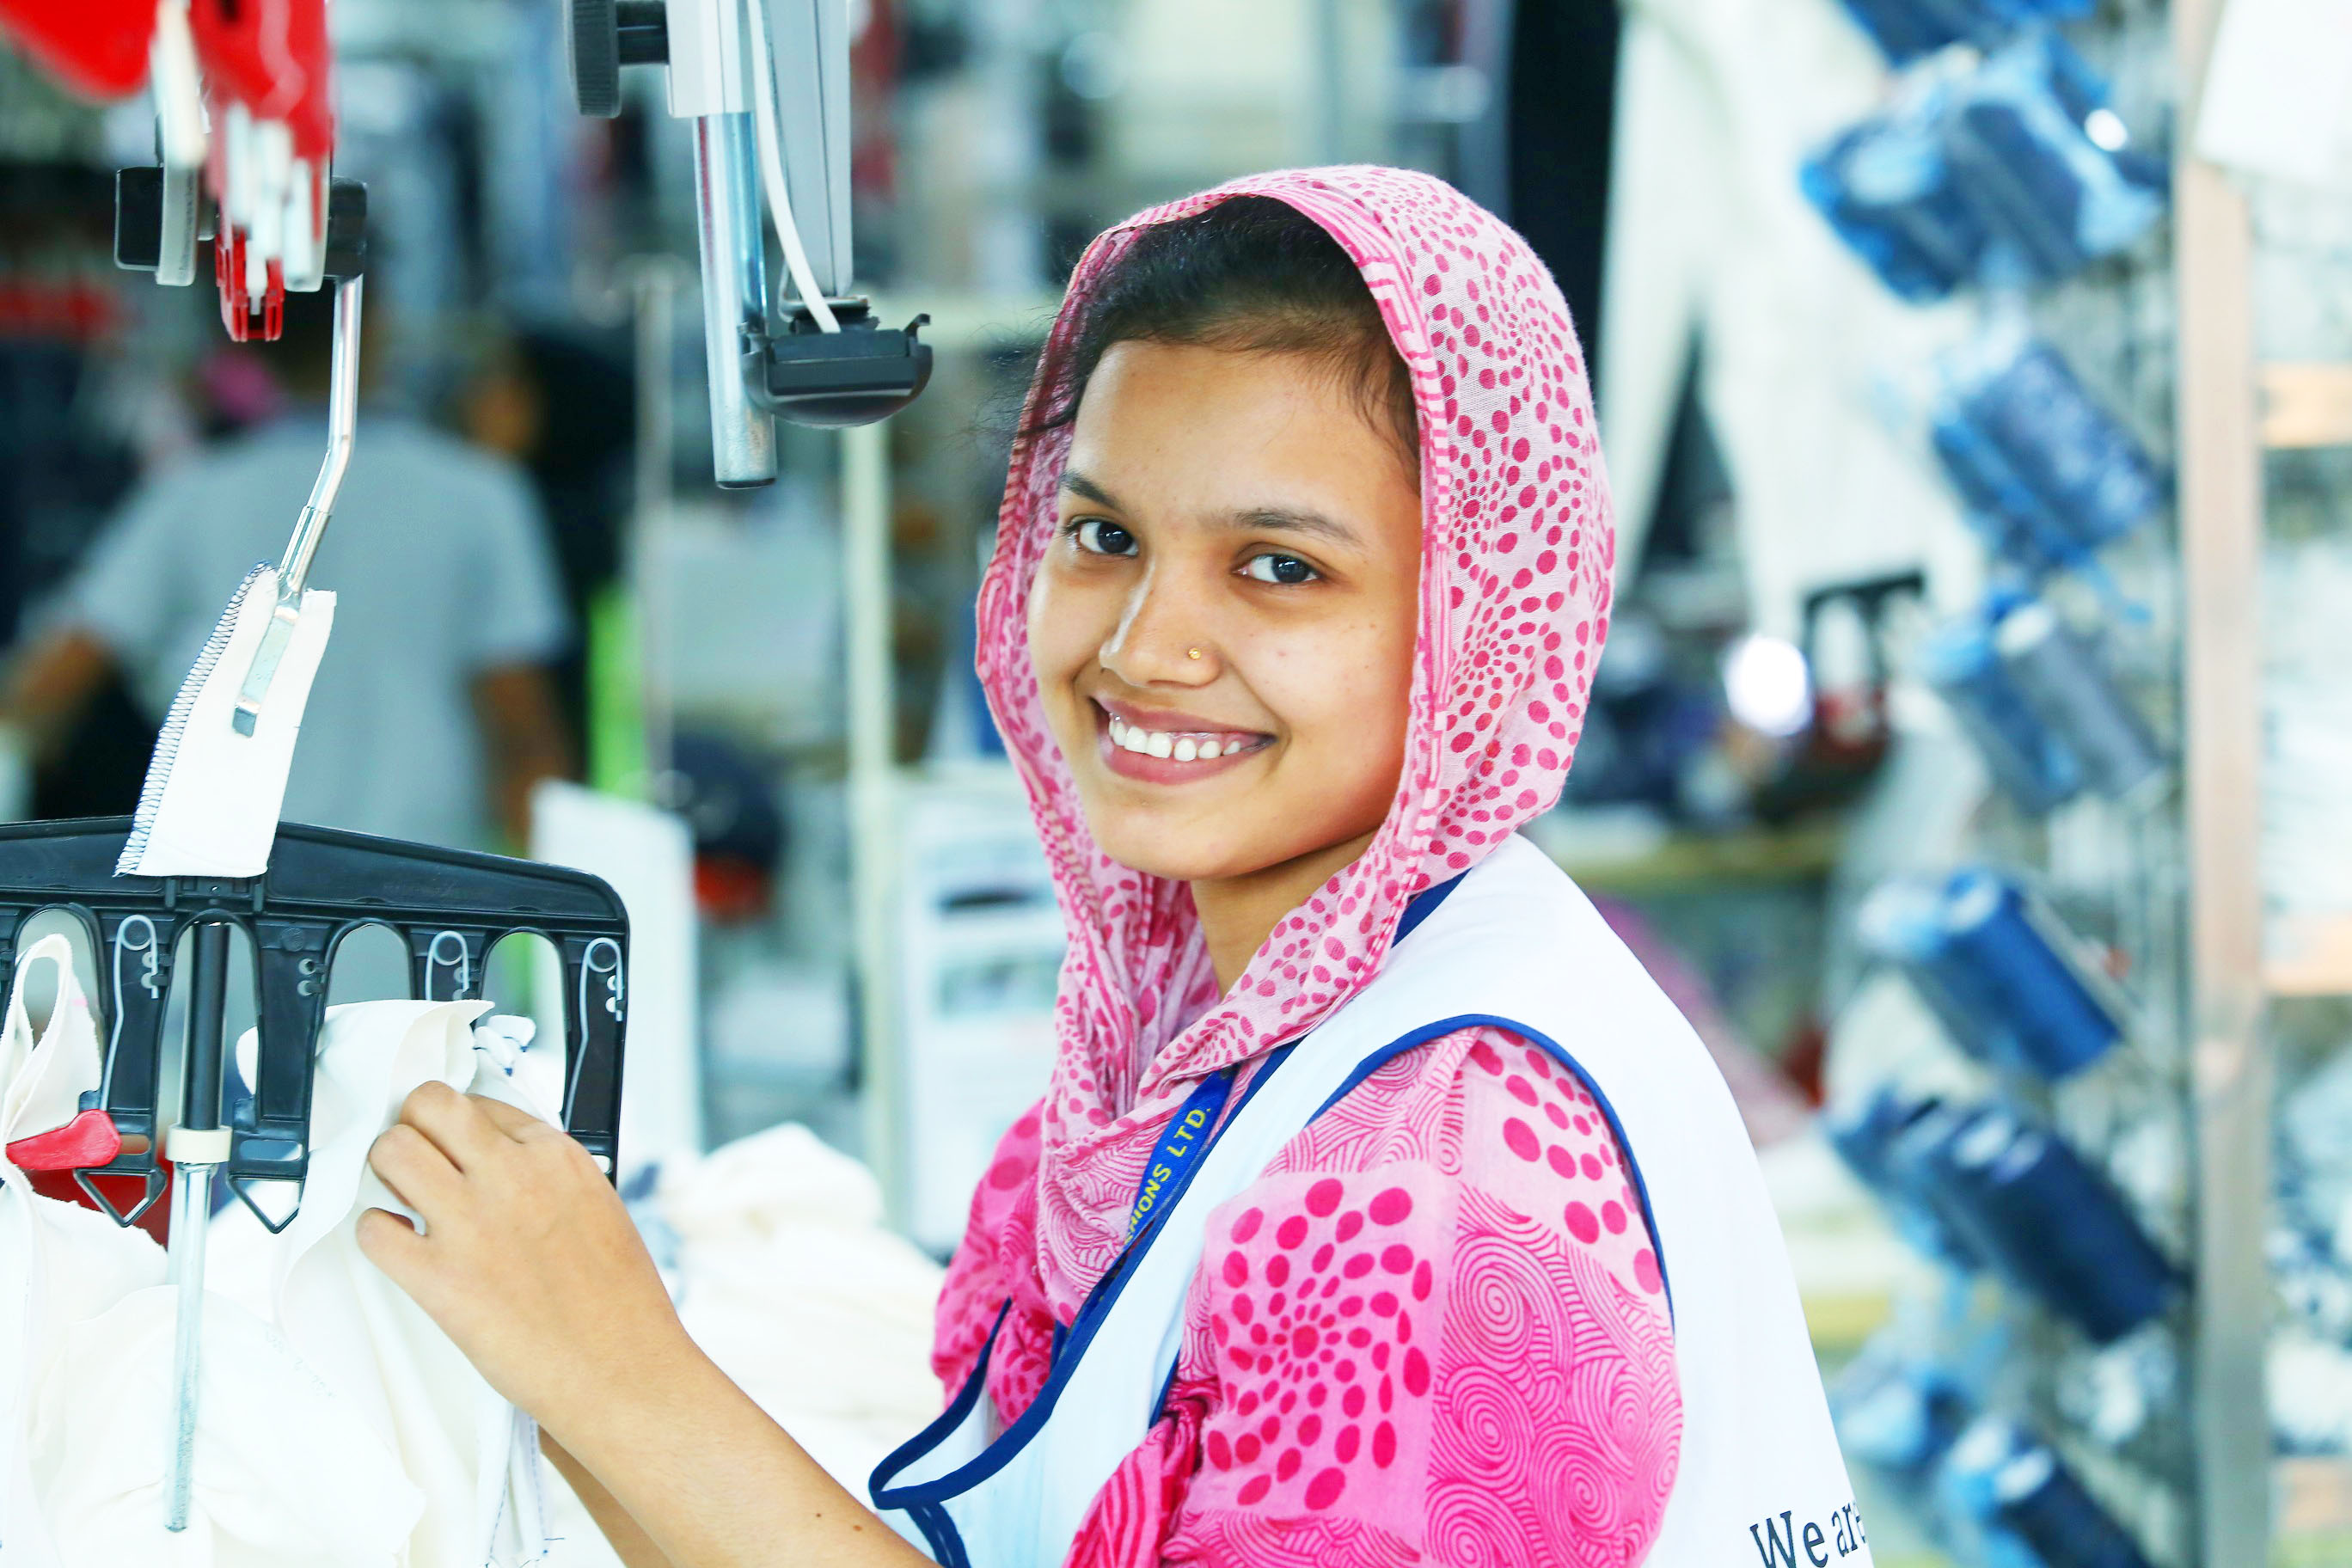 term paper on garments industry in bangladesh